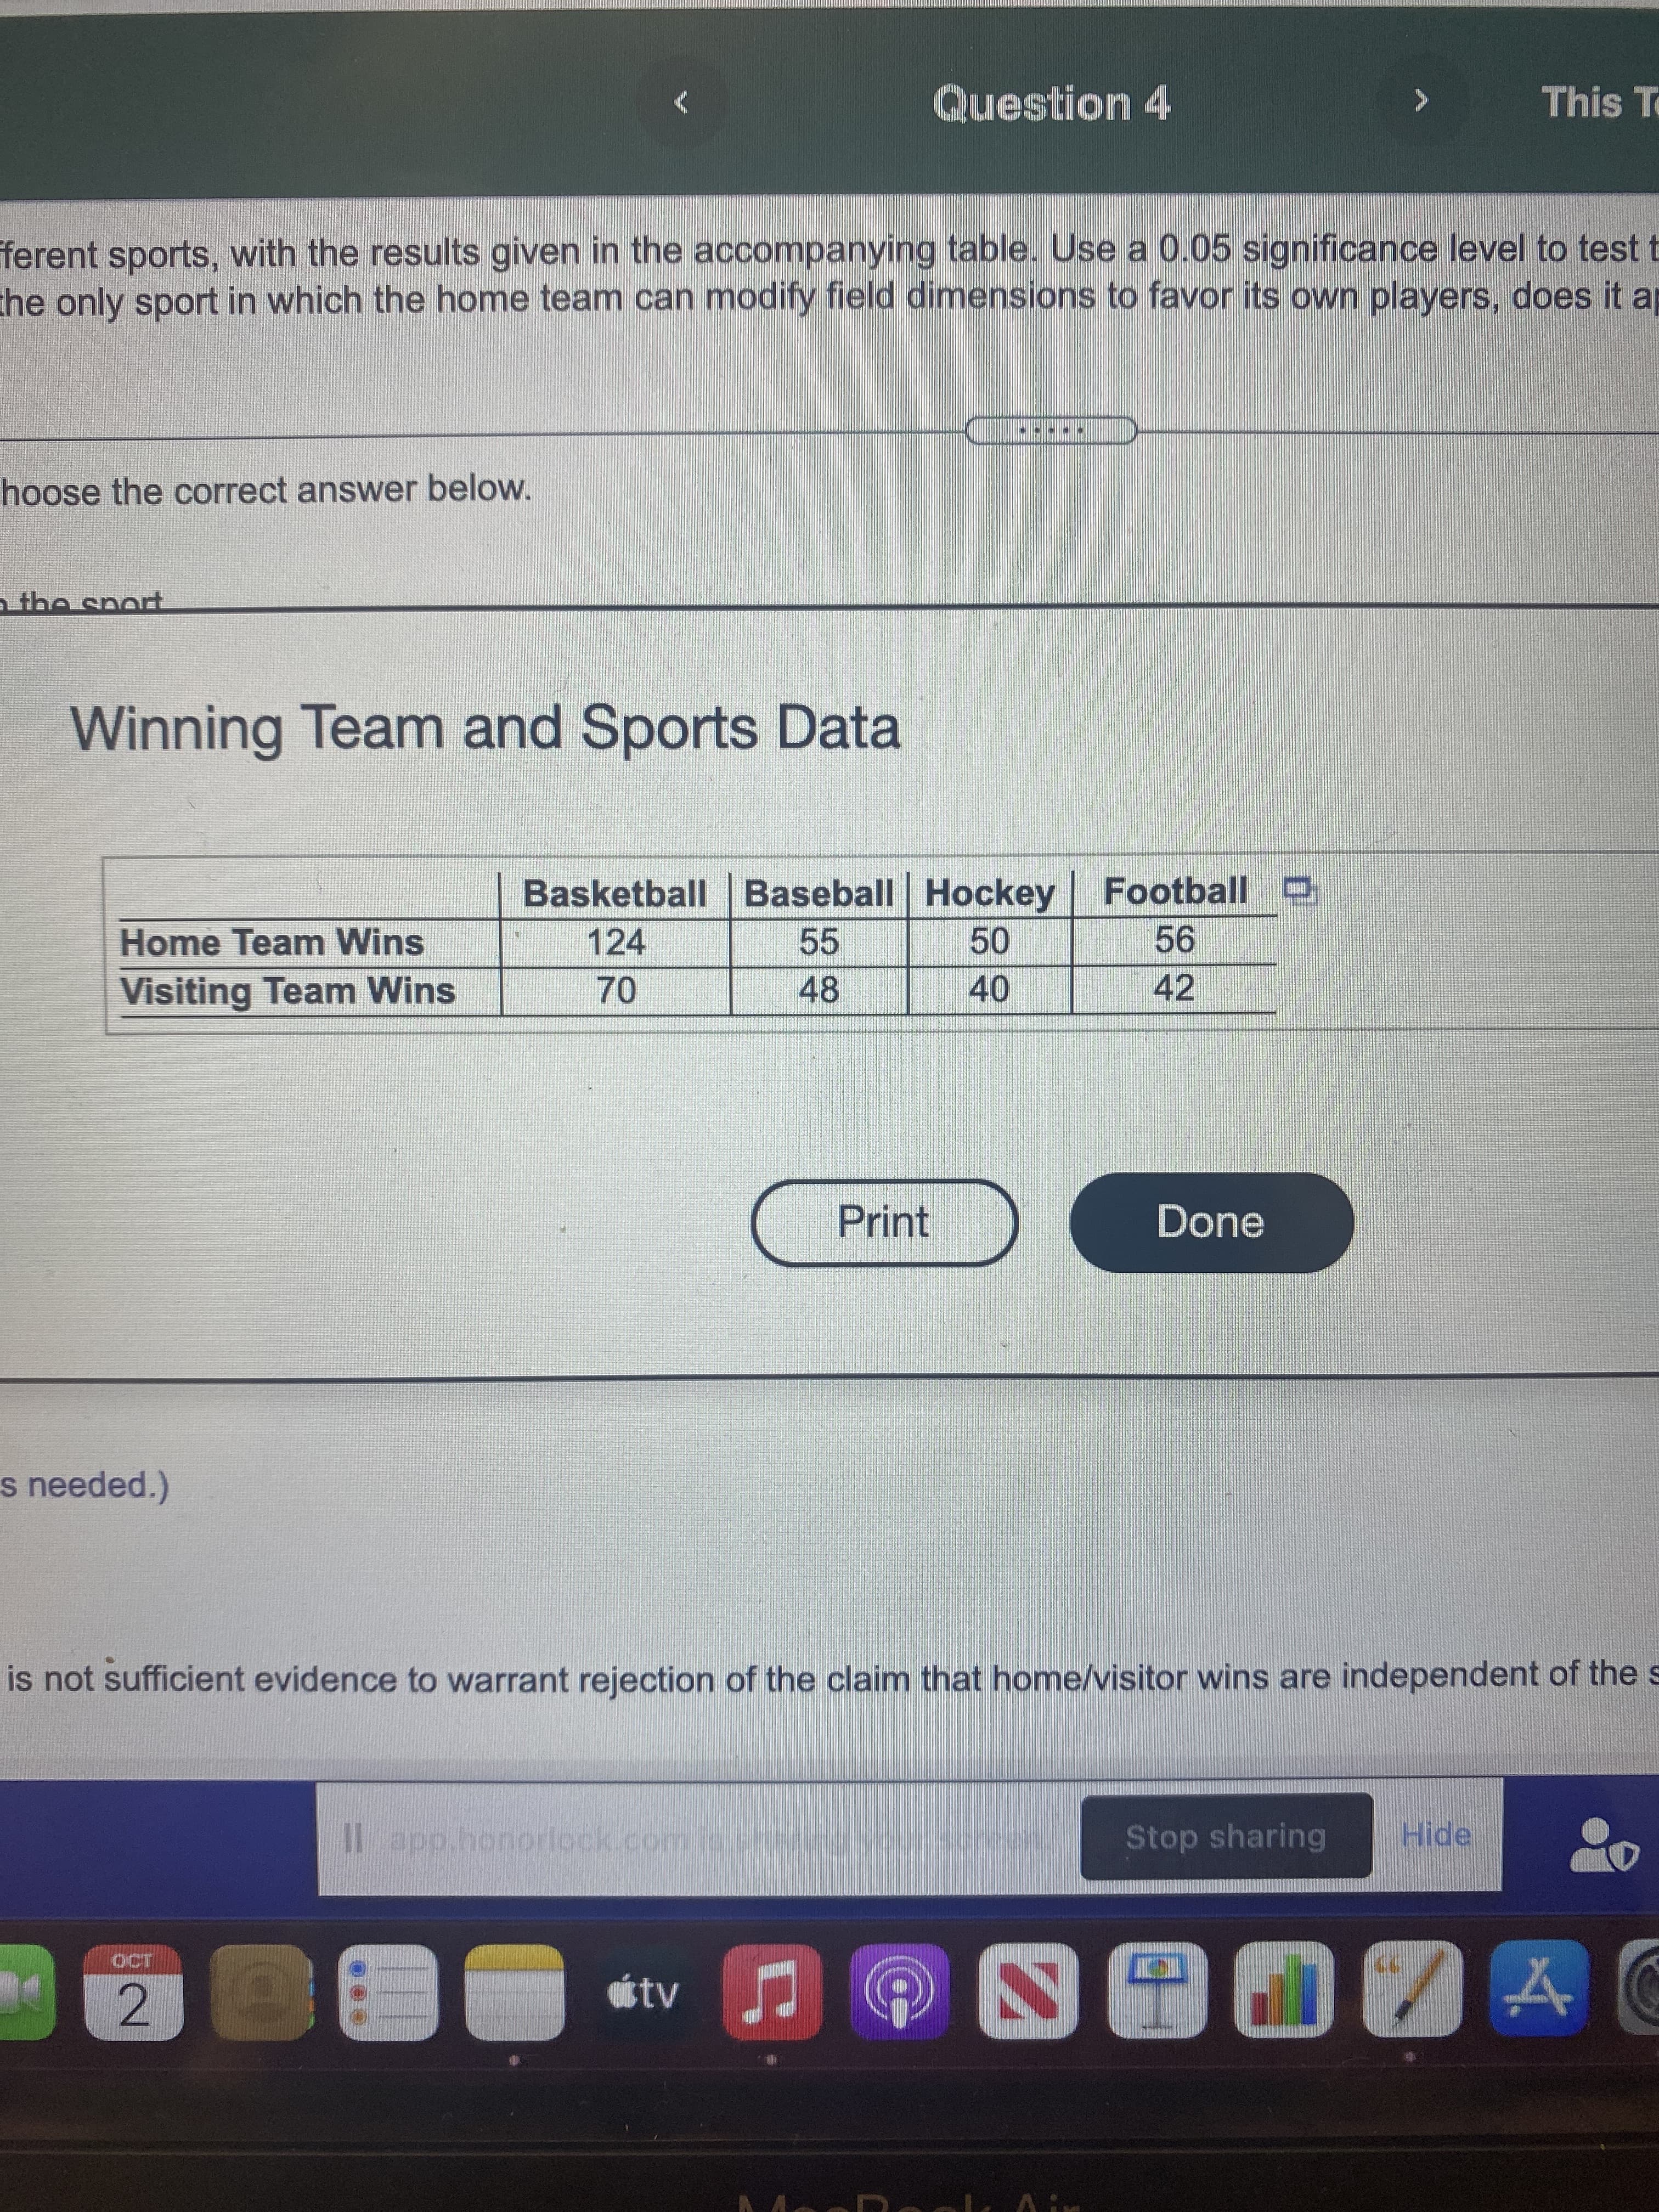 Question 4
This To
ferent sports, with the results given in the accompanying table. Use a 0.05 significance level to test t
che only sport in which the home team can modify field dimensions to favor its own players, does it ap
hoose the correct answer below.
Winning Team and Sports Data
Basketball Baseball Hockey Football D
Home Team Wins
124
55
Visiting Team Wins
48
42
40
Print
Done
s needed.)
is not sufficient evidence to warrant rejection of the claim that home/visitor wins are independent of the s
l app.honorlock.com.isshei
Stop sharing
Hide
tv
